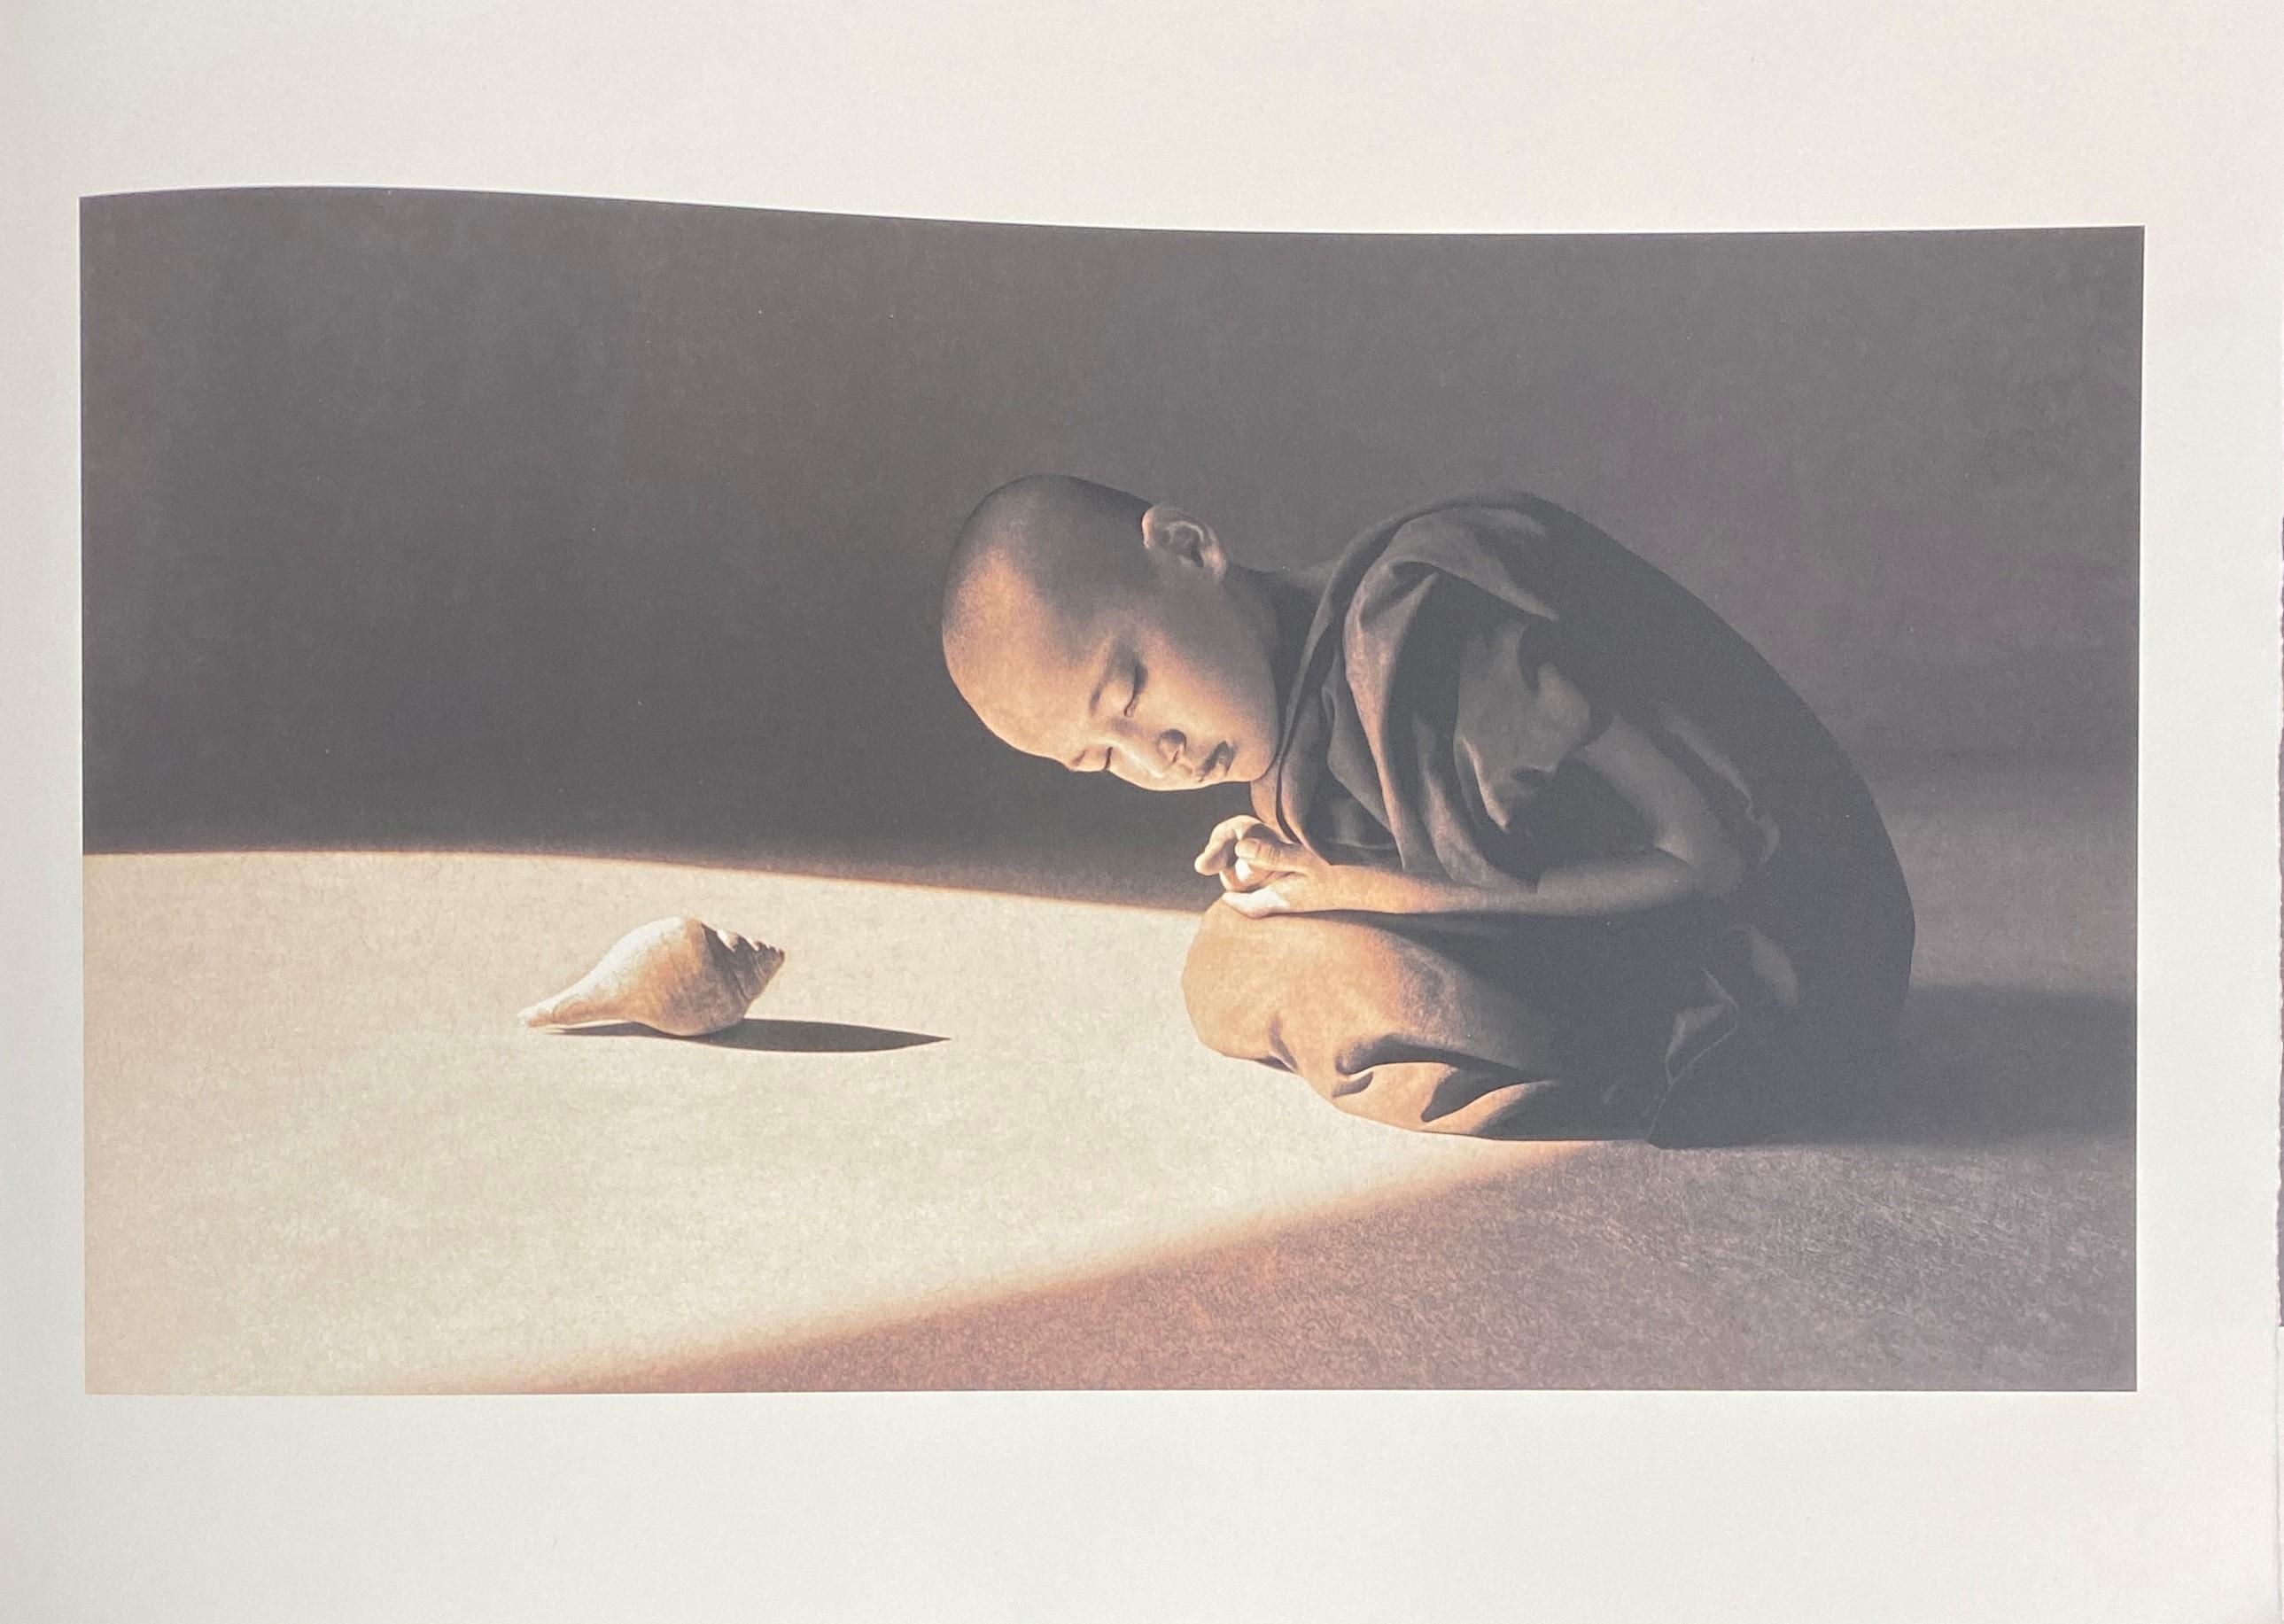 Artwork by Gregory Colbert, Ashes & Snow, Selected Works, Made of sepia photolithographs